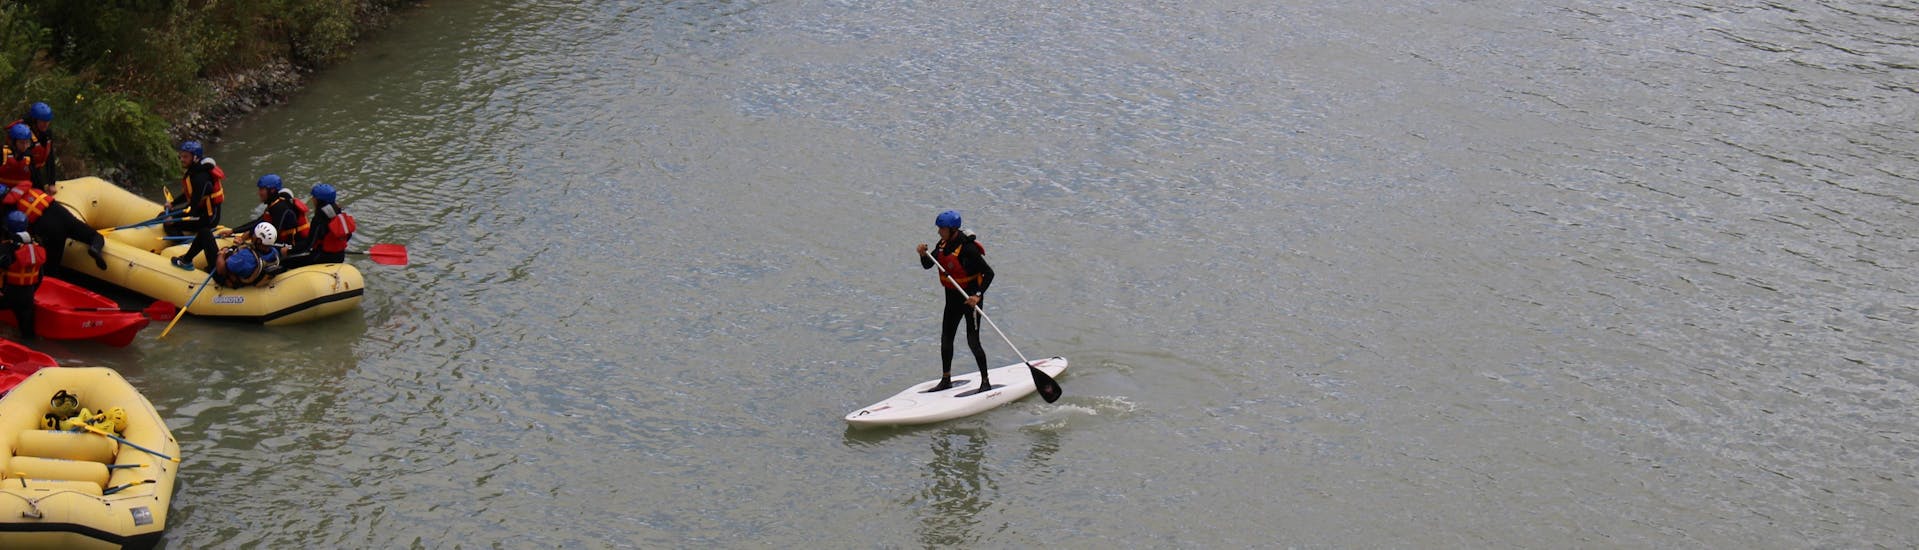 A participant is approaching the bank of the river during the SUP River Experience on the Adda River with Indomita Valtellina River.